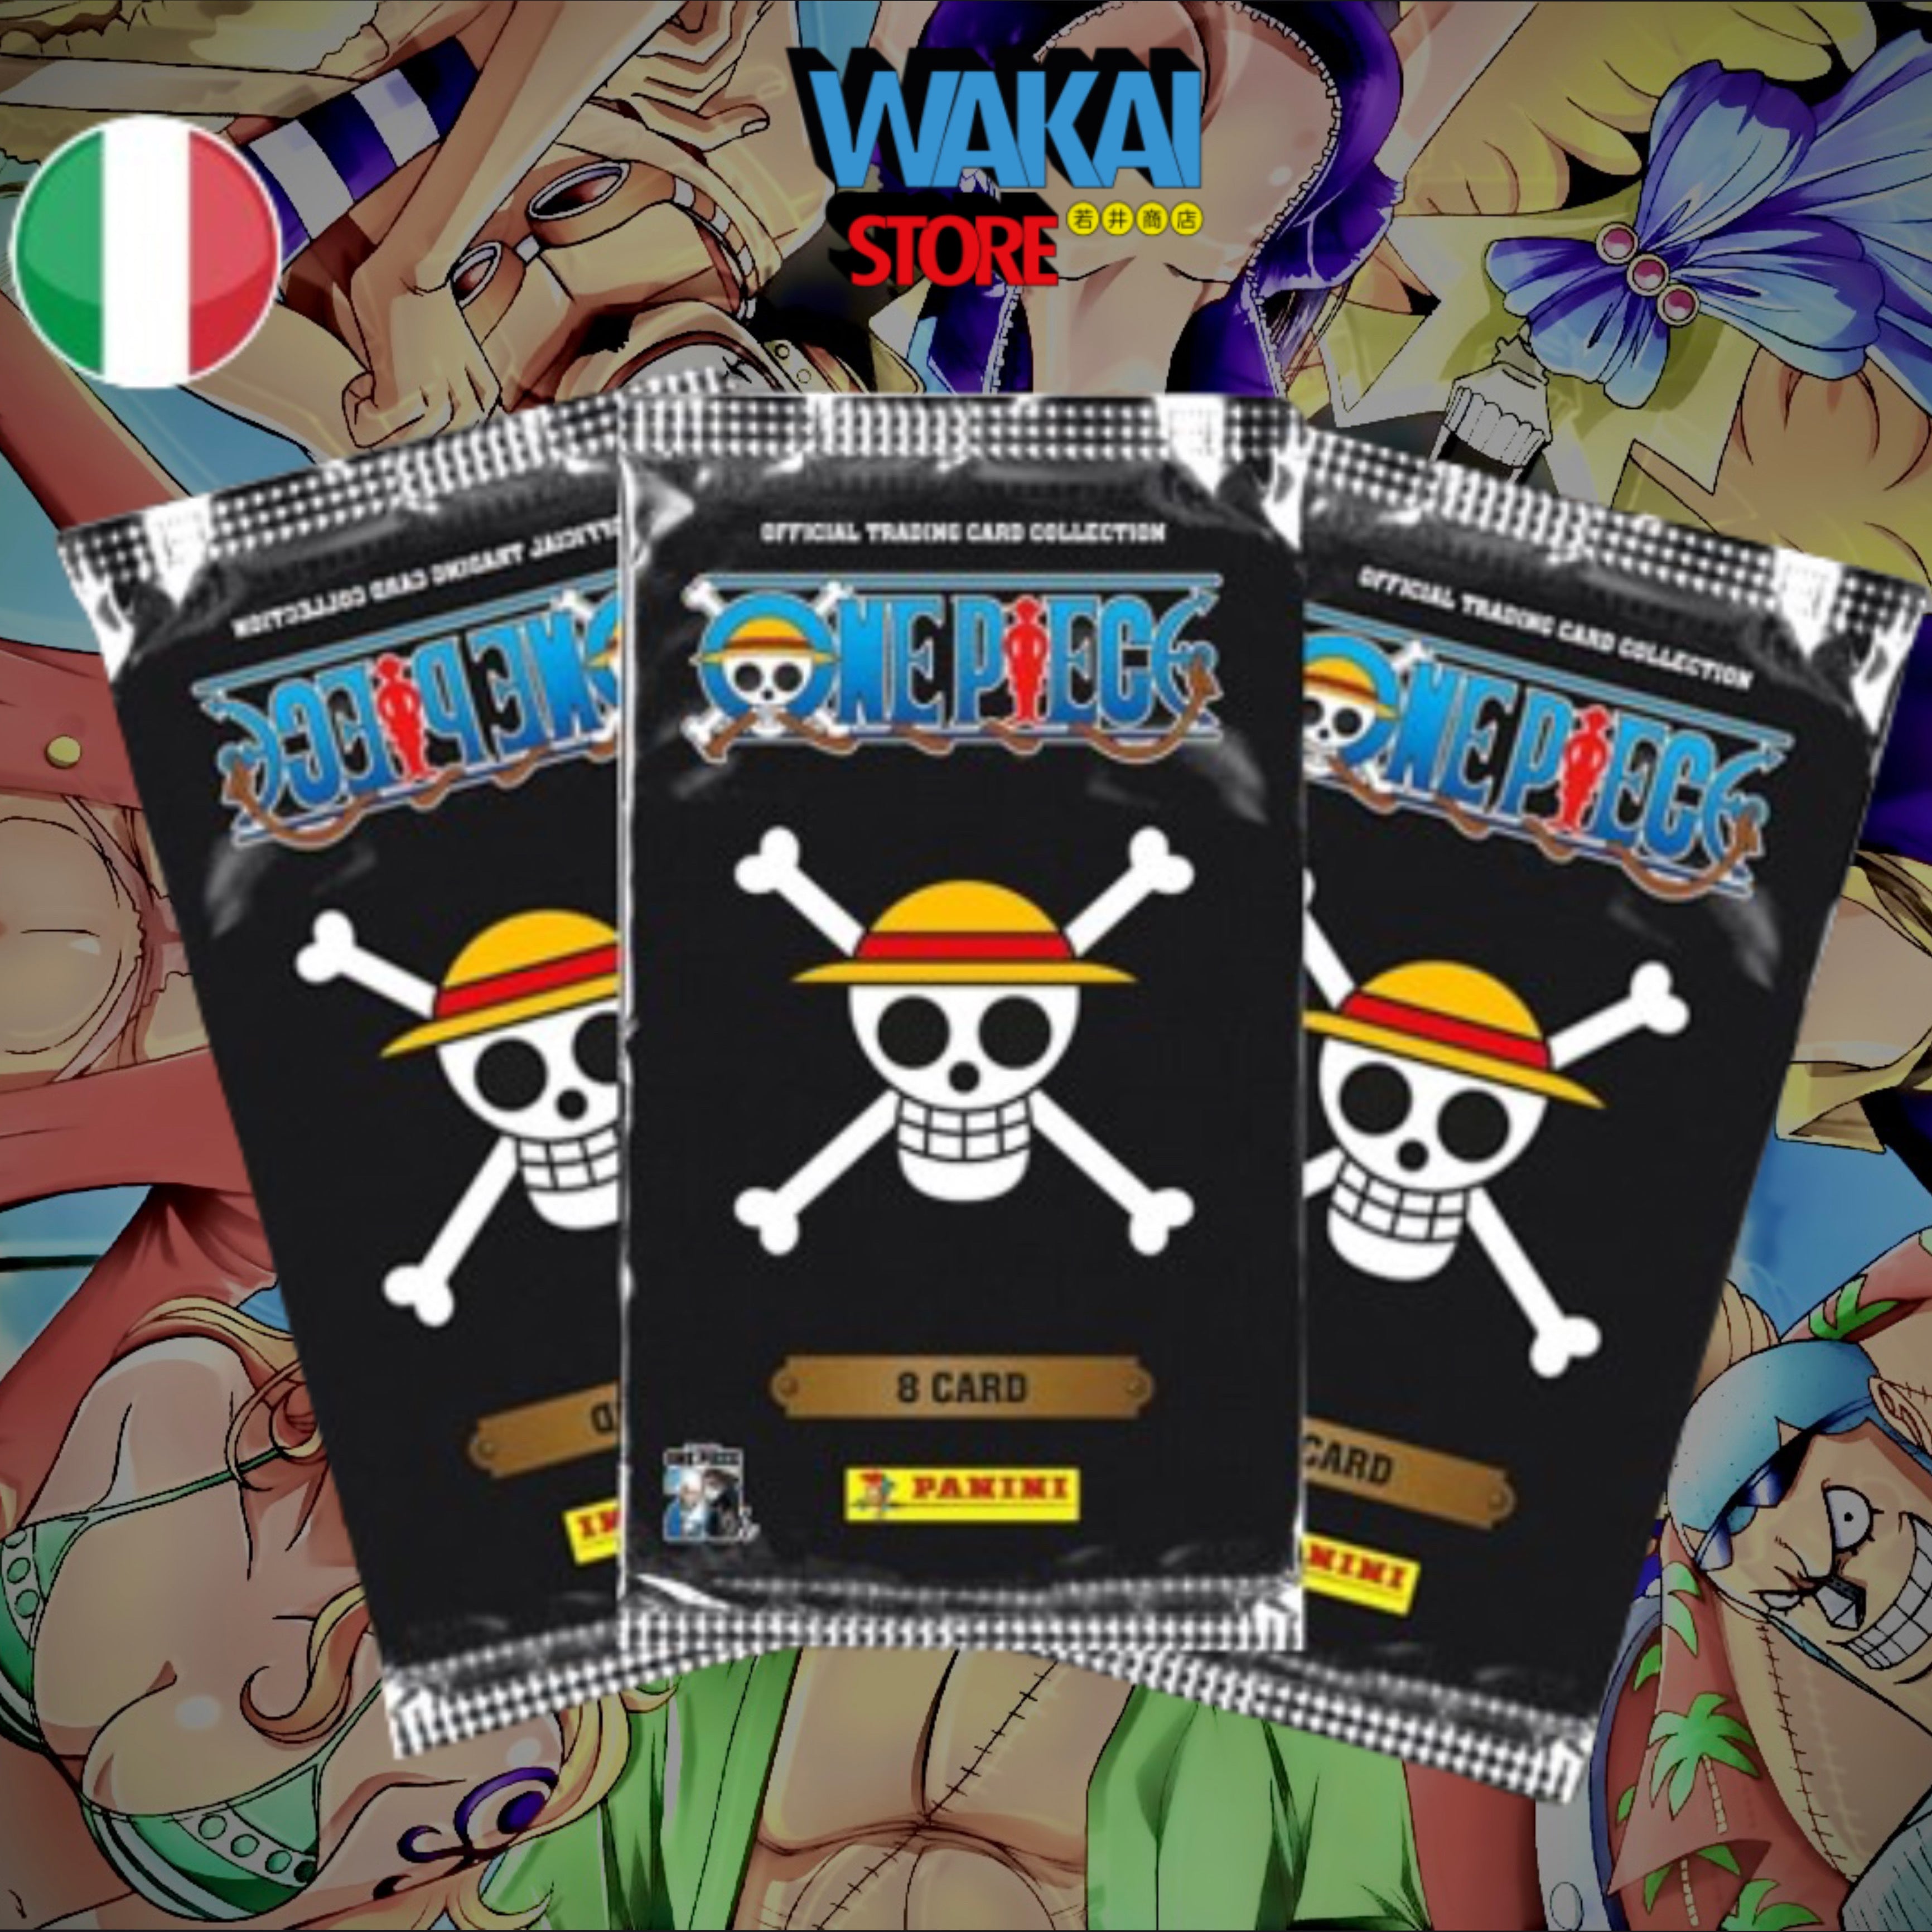 “”PRE-ORDER”” ONE PIECE 25TH
ANNIVERSARY
TRADING CARD -
ECOBLISTER (contiene 3
BUSTINE + 1 CARD LIMITED EDITION)